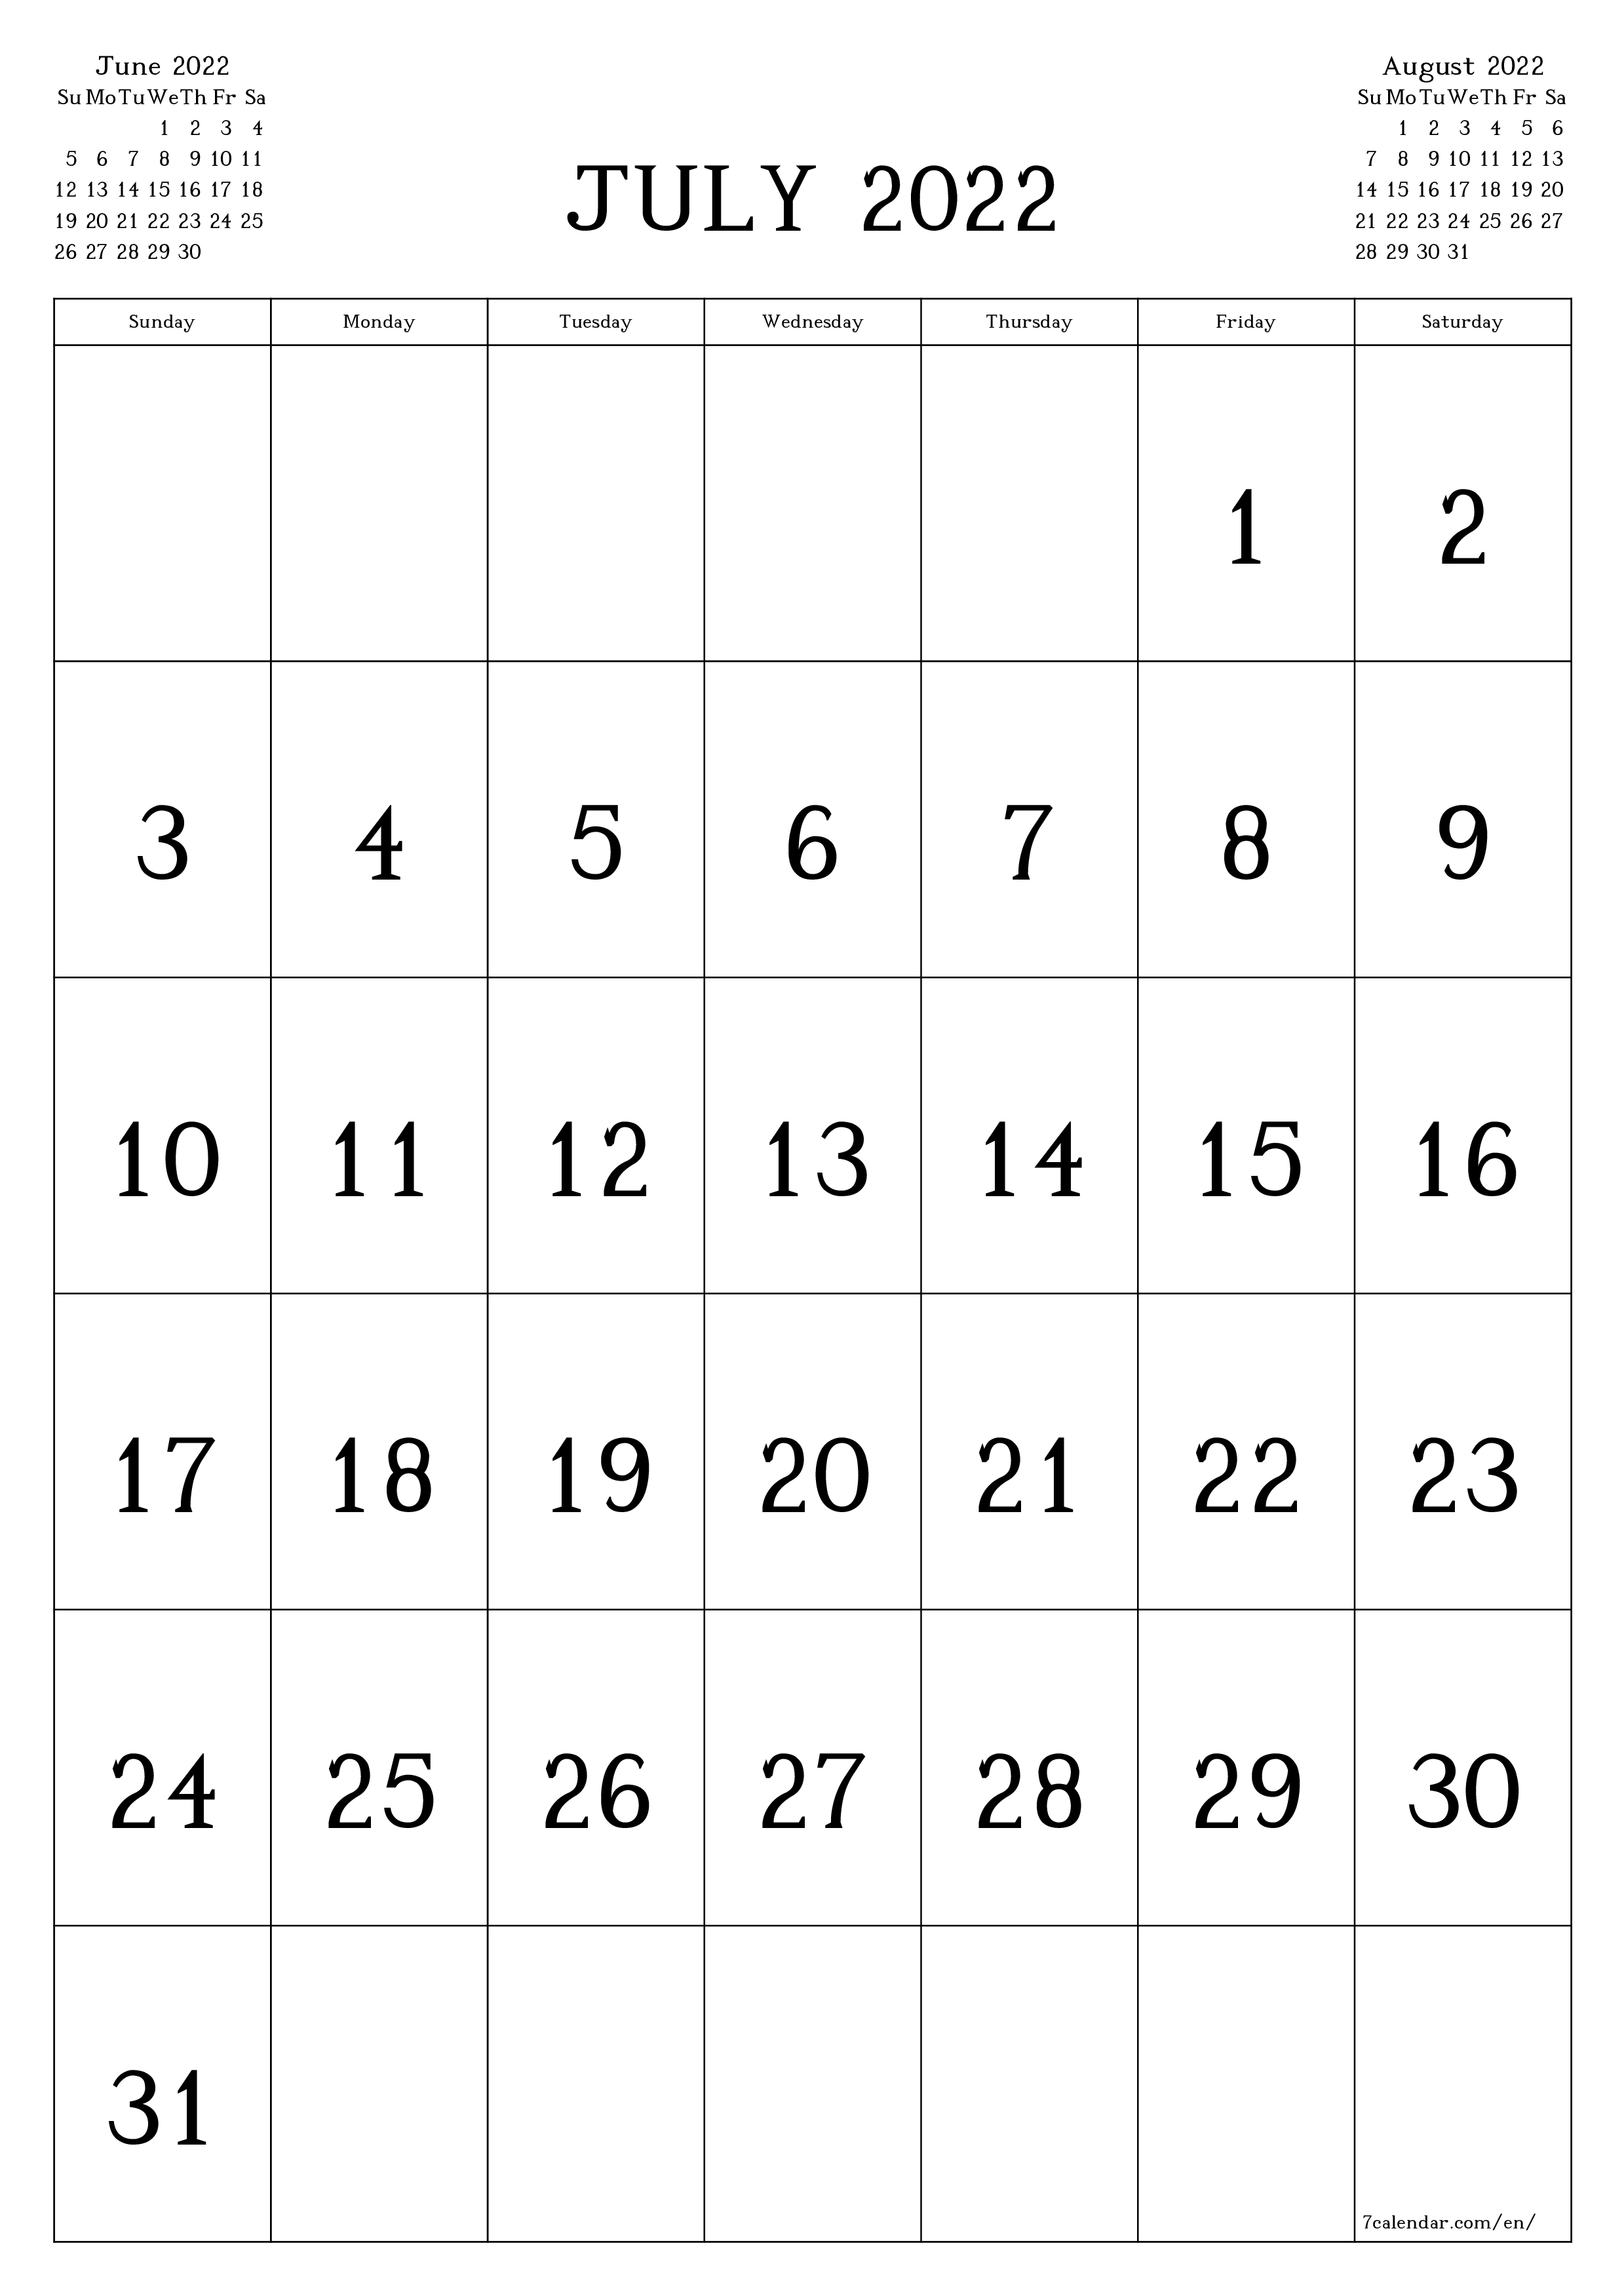 Blank monthly dated HD template image of calendar for month July 2022 save and print to PDF PNG English - 7calendar.com